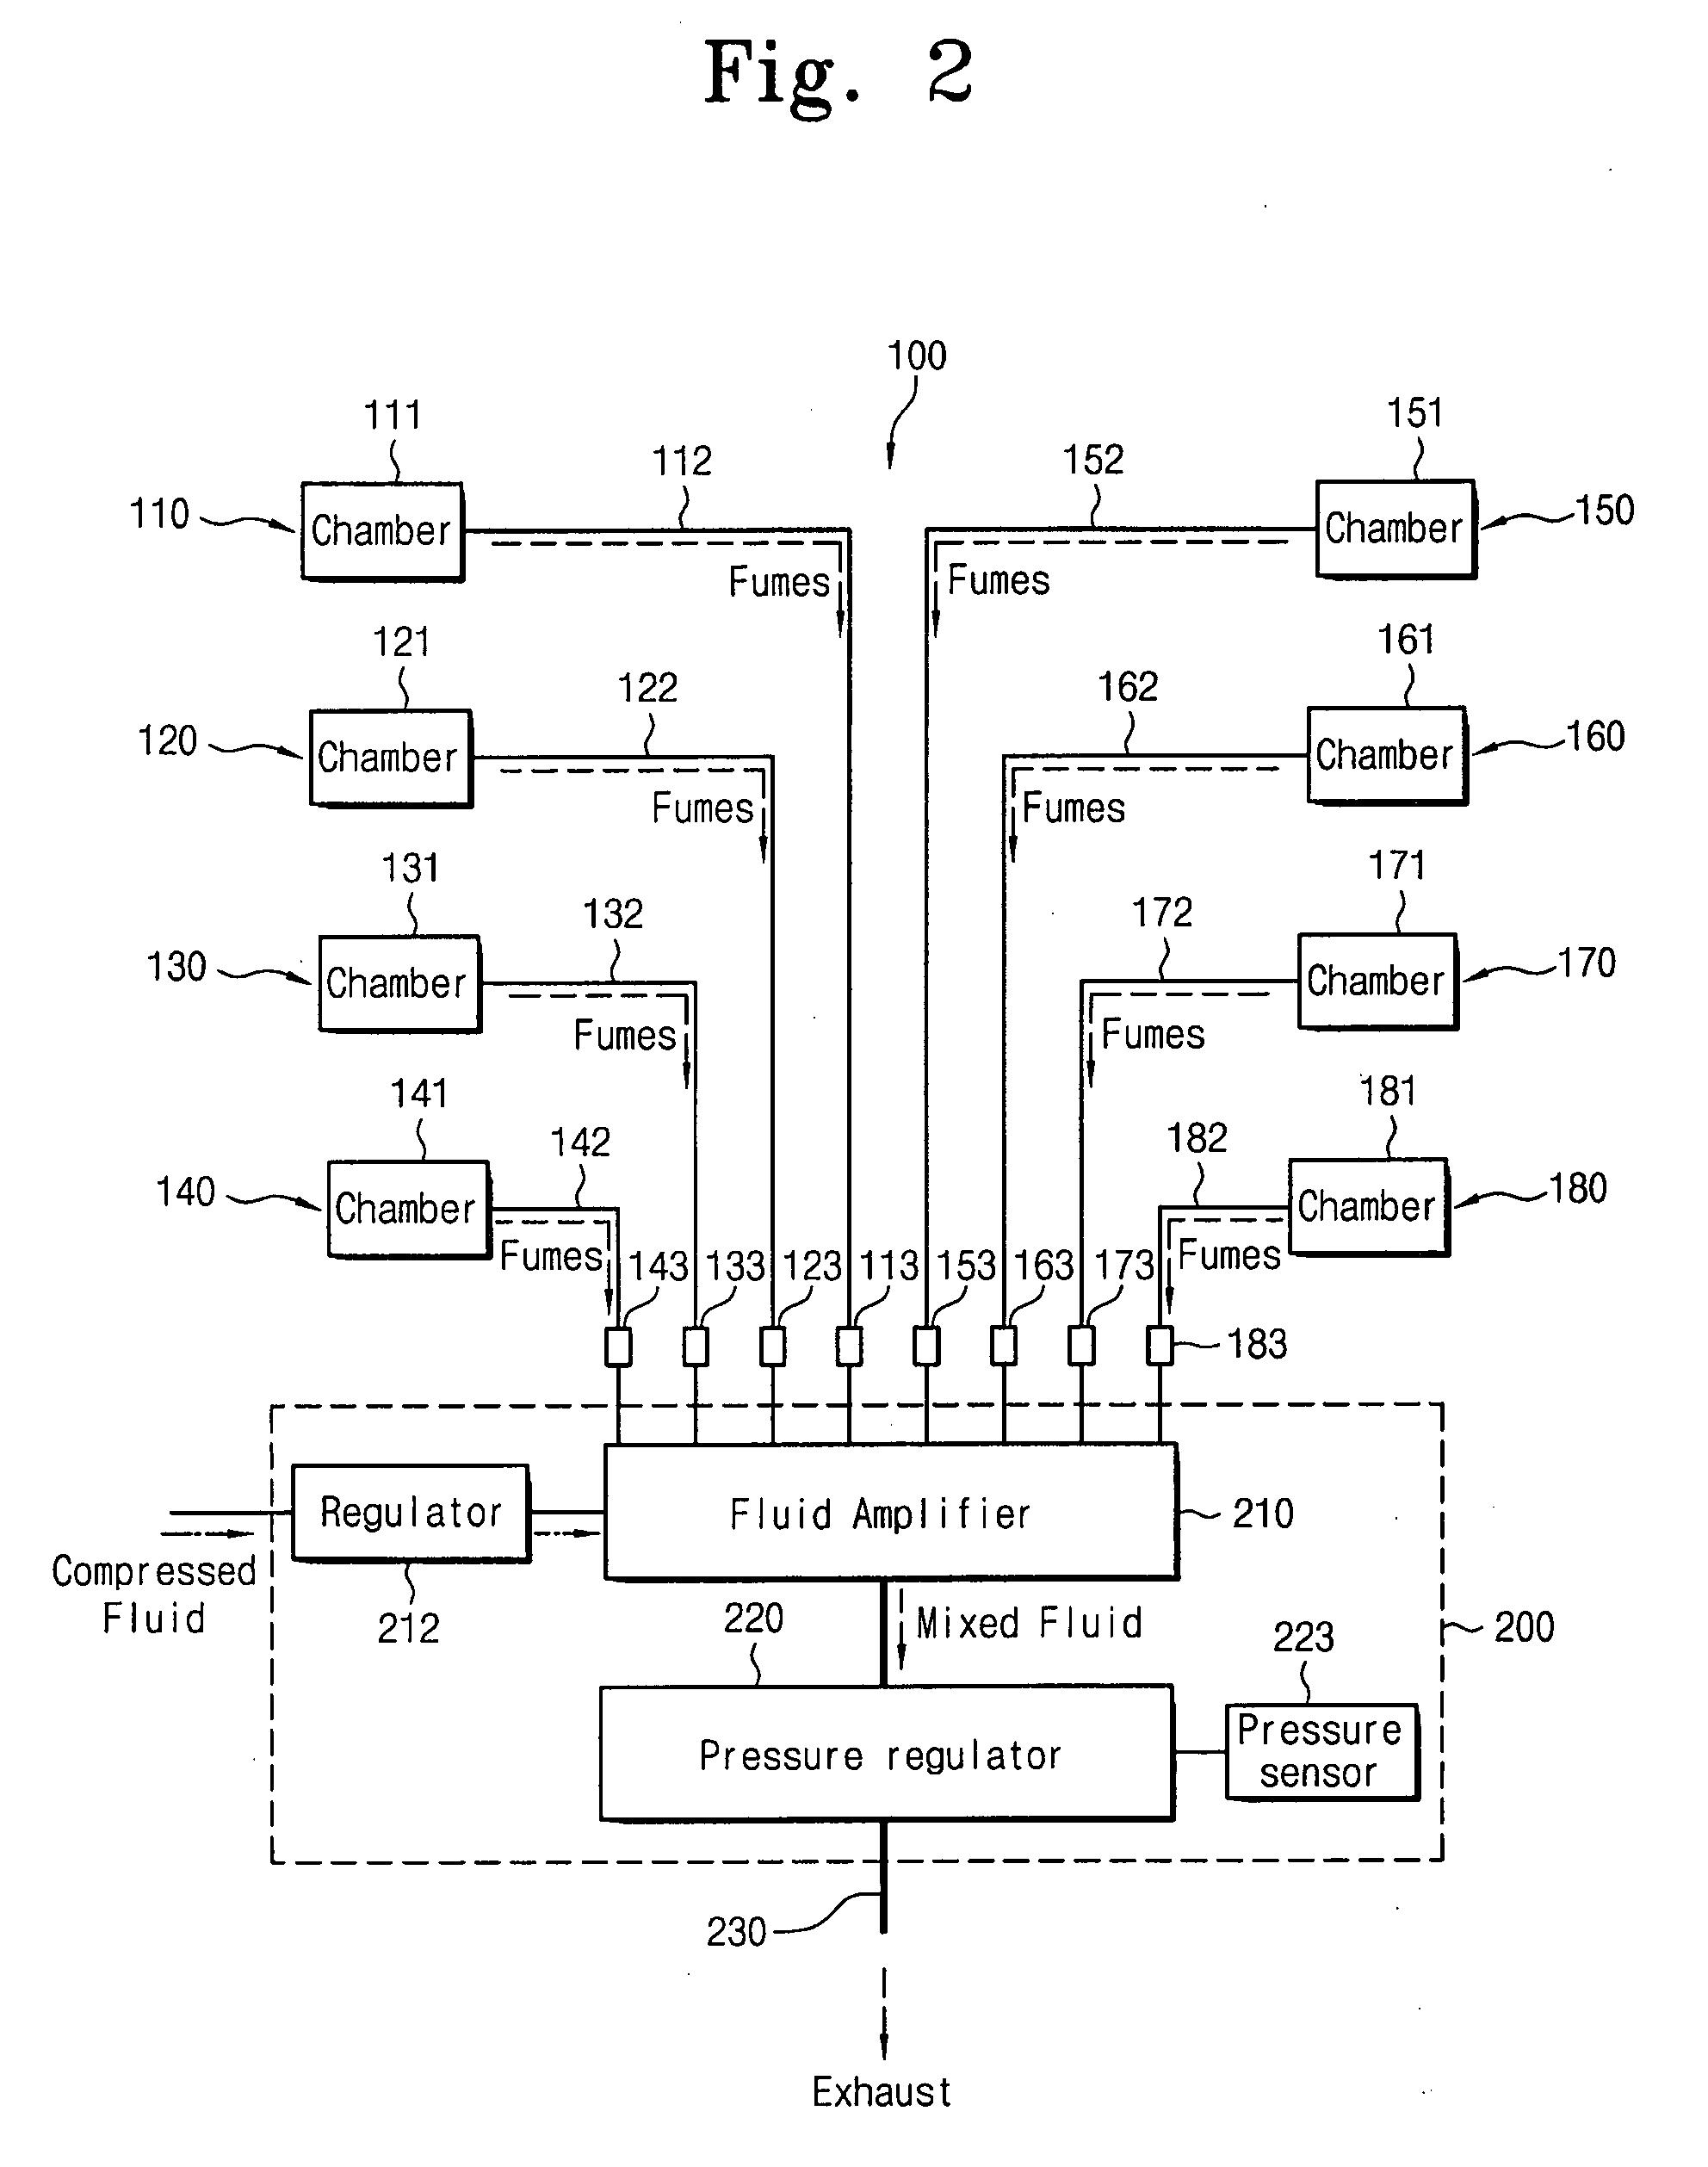 Apparatus for manufacturing semiconductor devices